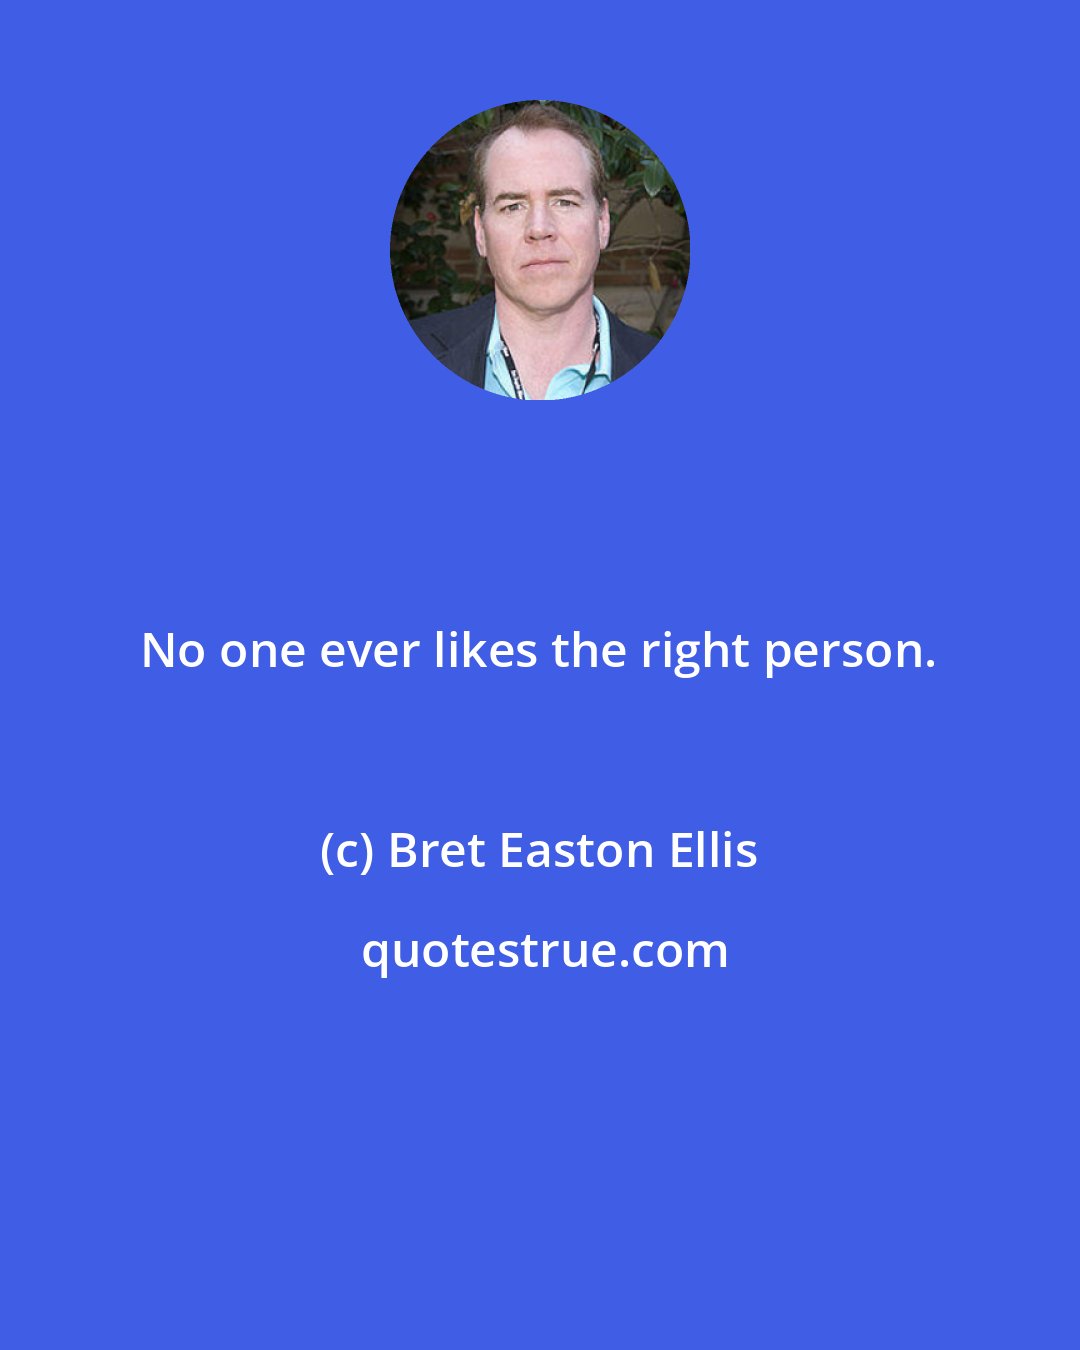 Bret Easton Ellis: No one ever likes the right person.